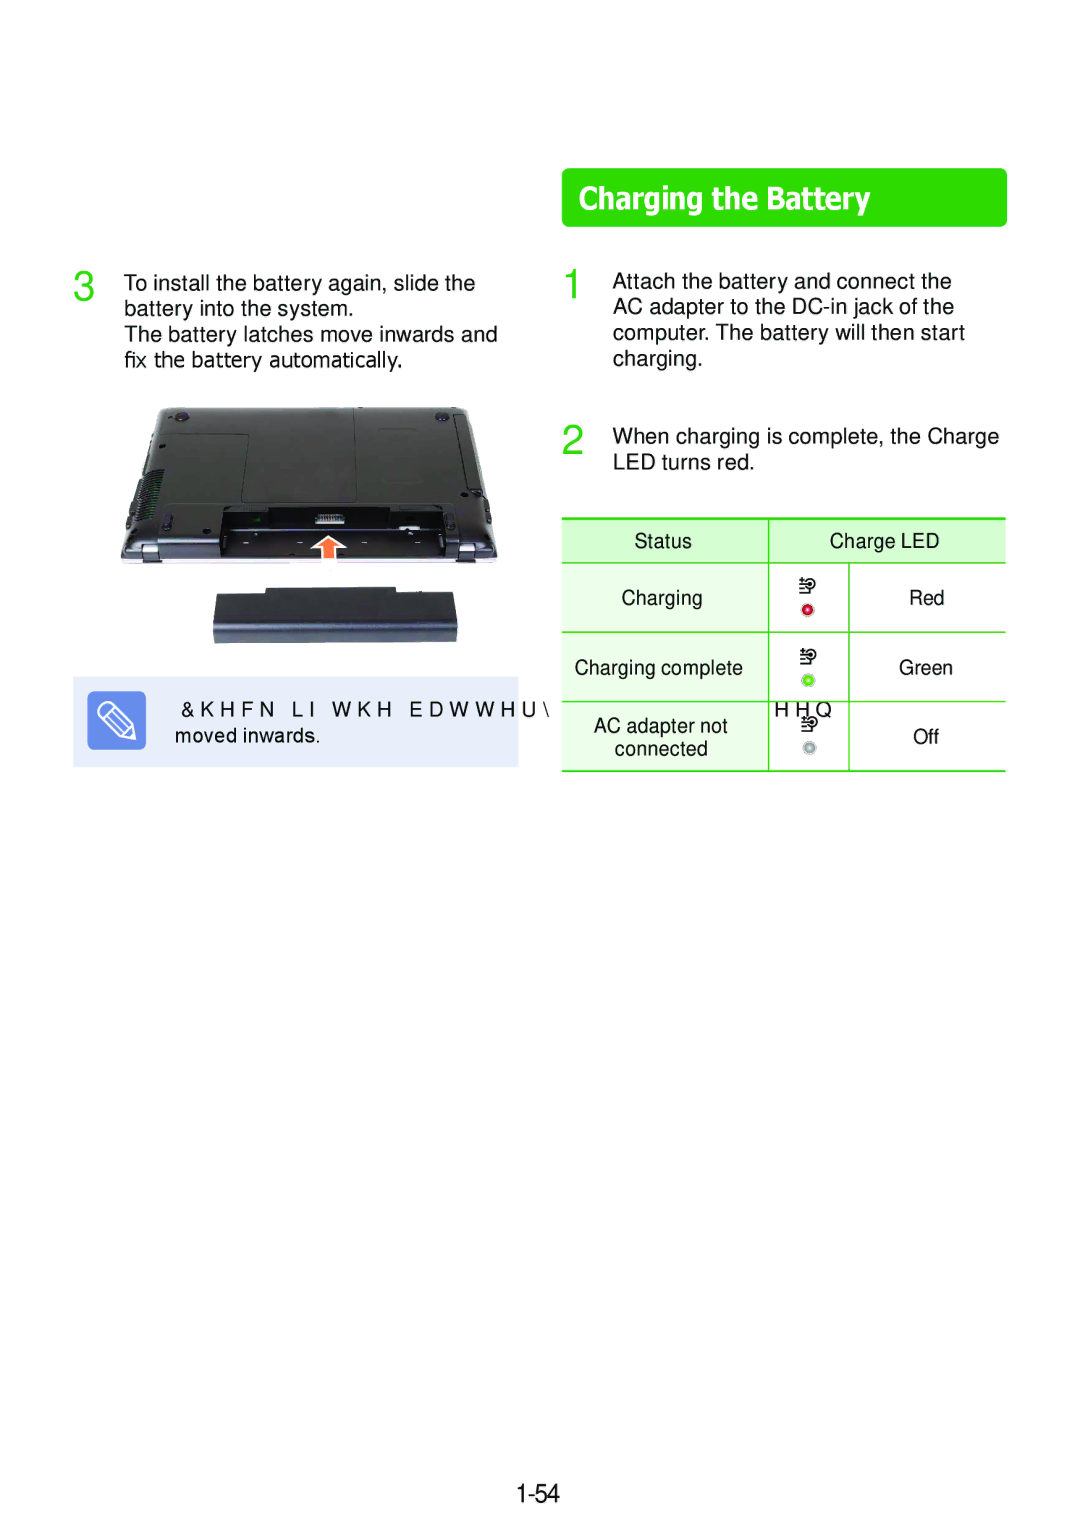 Samsung NP370R5V-S02HU Charging the Battery, Check if the battery latch has been moved inwards, Charge LED, Connected 